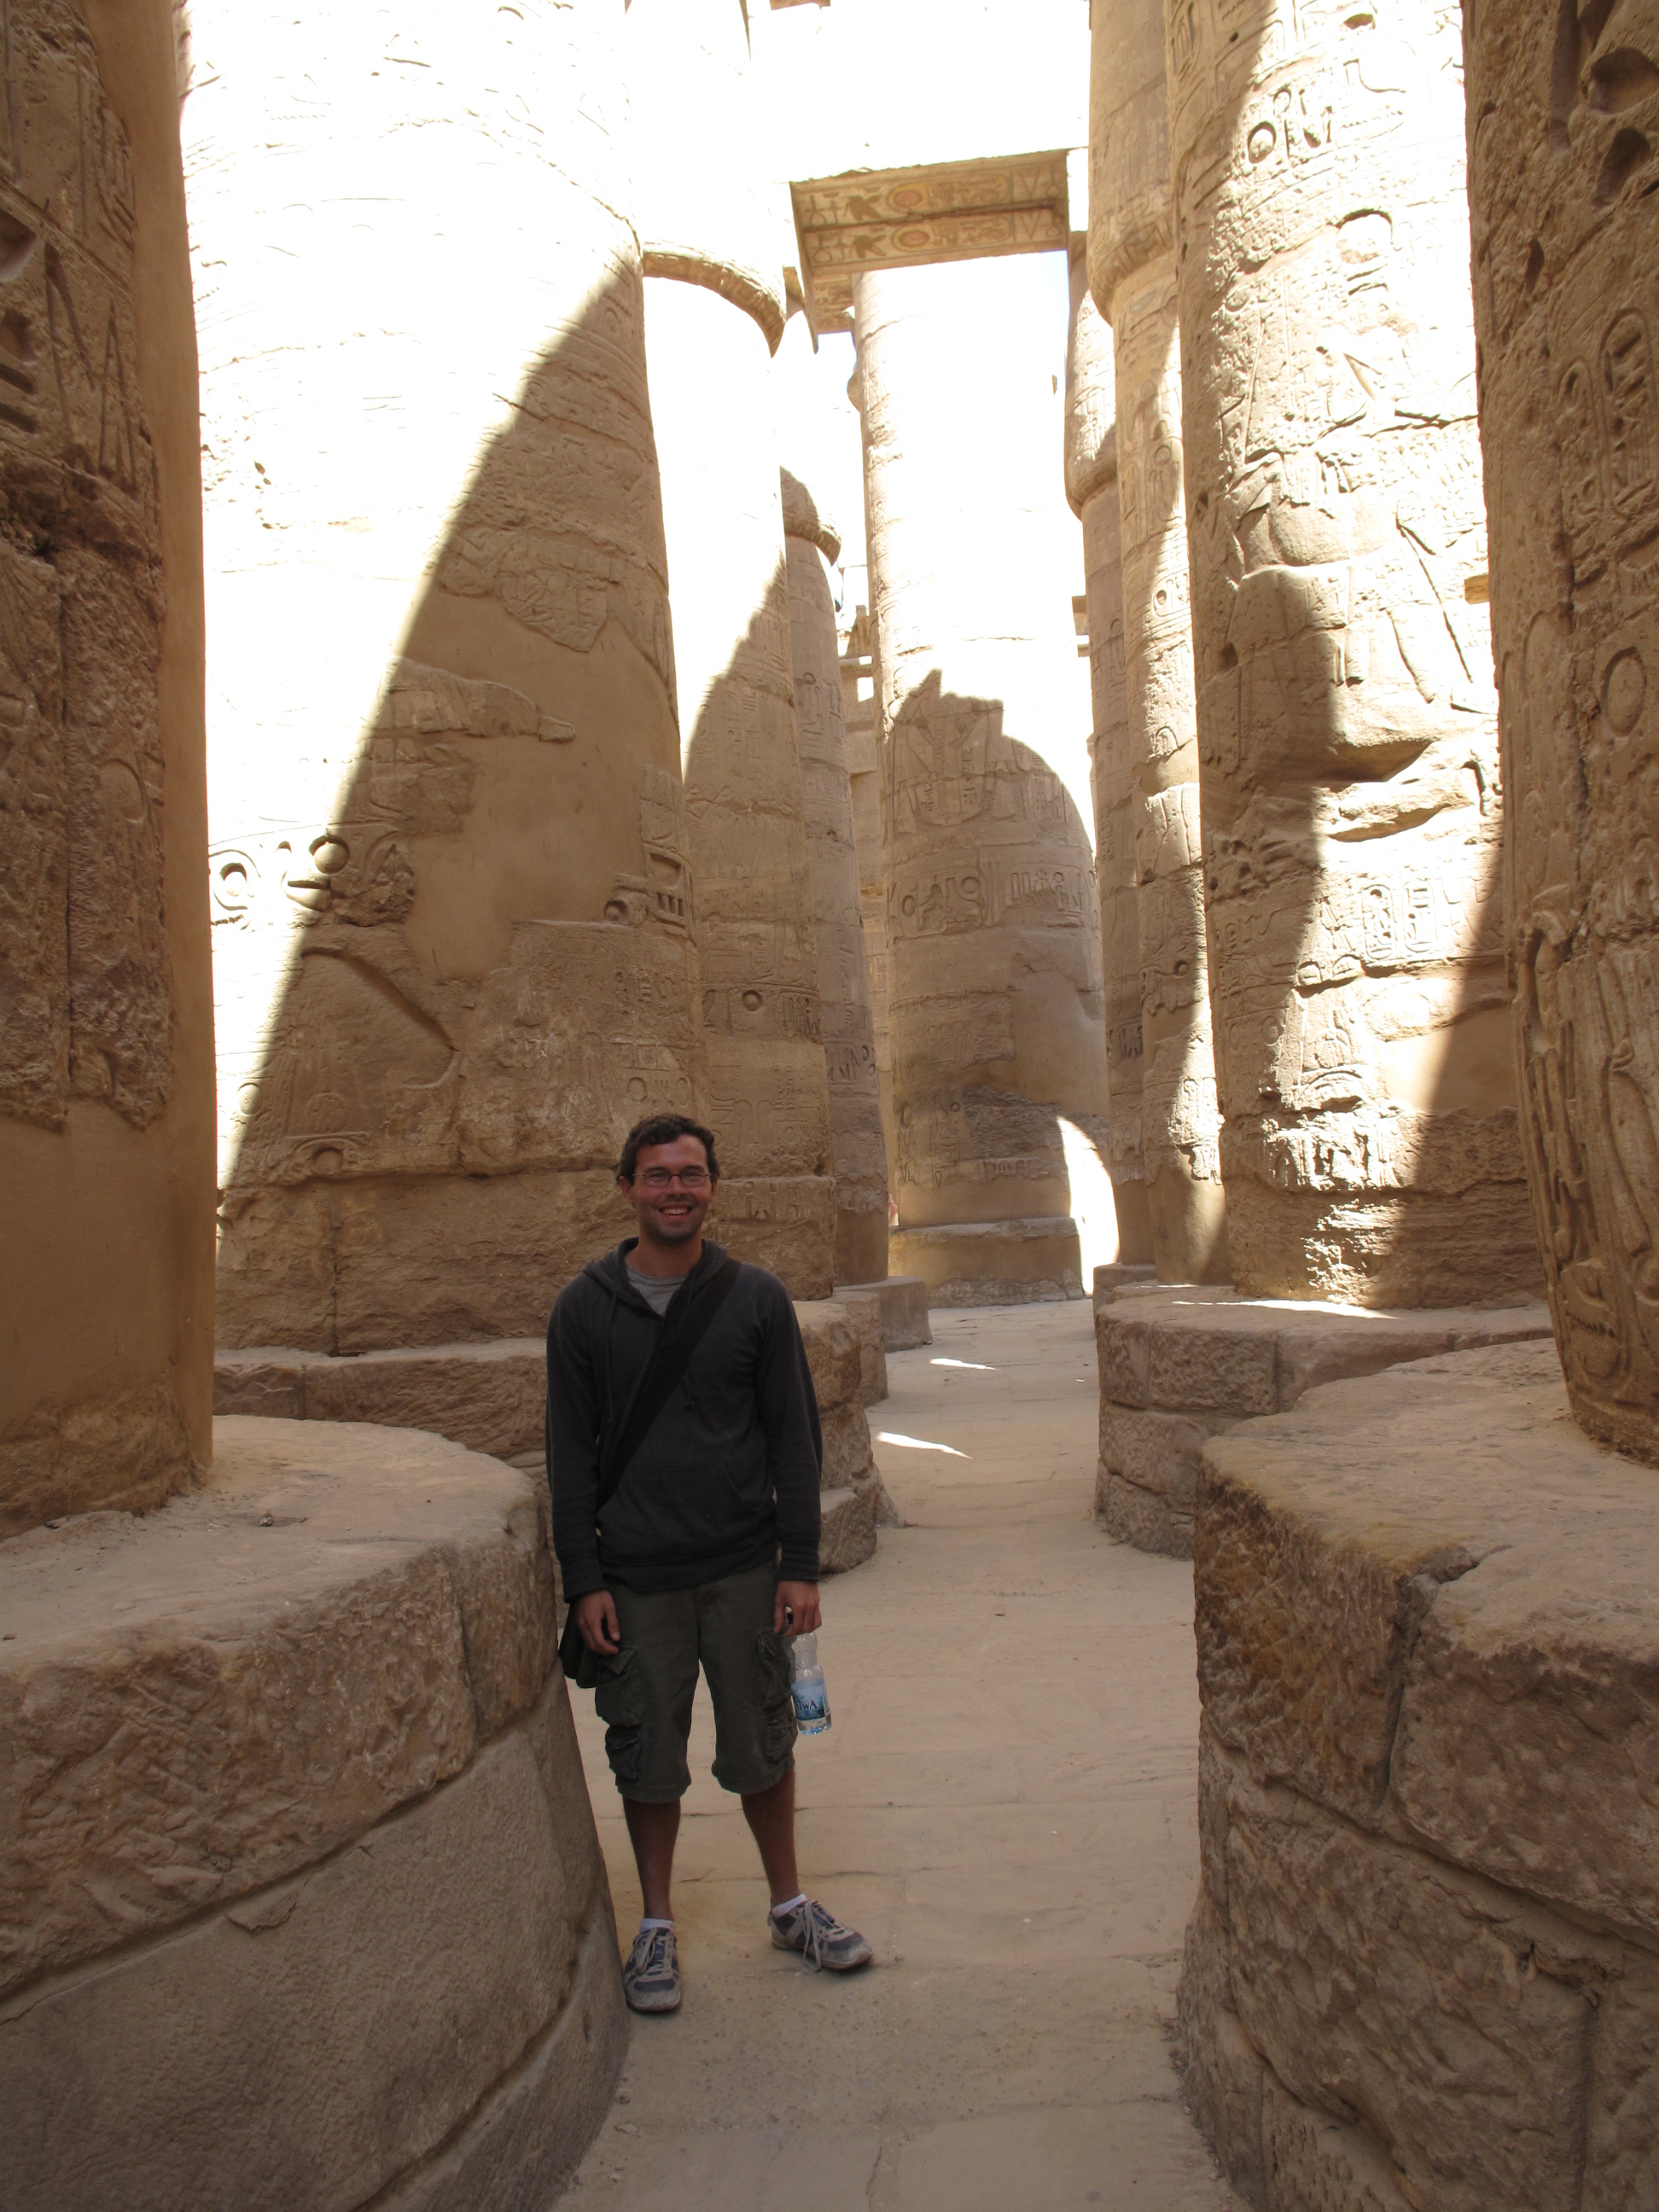 This is a picture of me in a temple complex in Egypt.